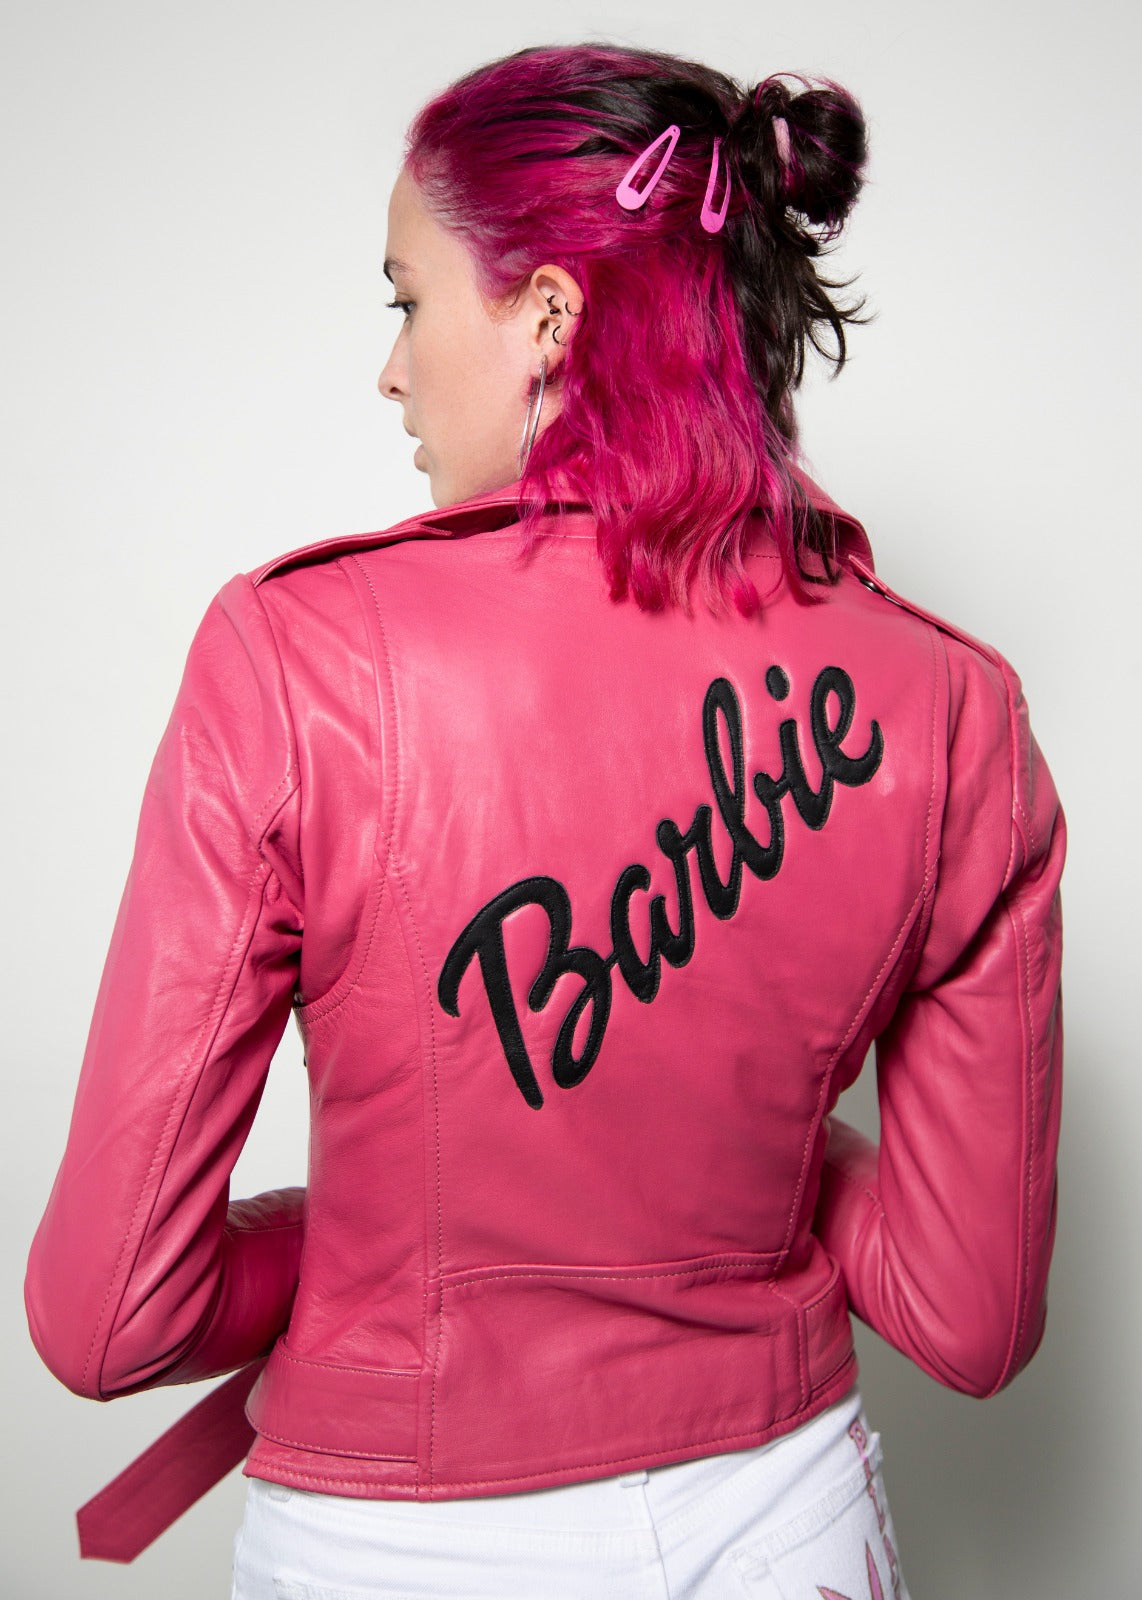 Womens Barbie Doll Pink Leather Jacket Girl